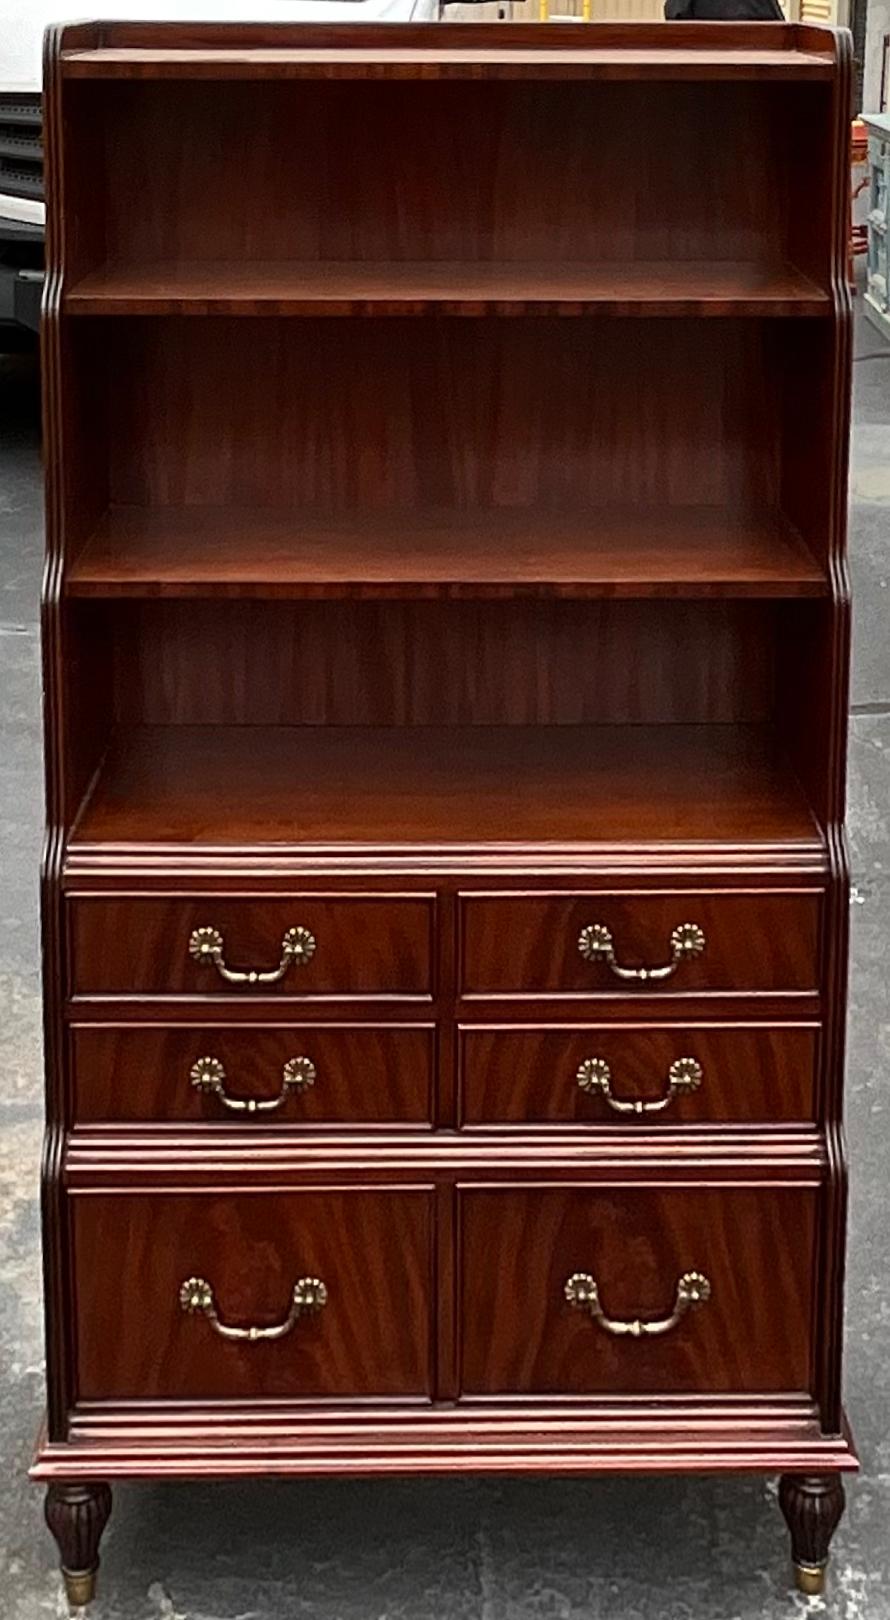 This is a pair of Regency style flame mahogany bookcases with brass hardware. They are a wonderful versatile size. The pair have dovetail construction with regard to the drawers, and turned feet. They are unmarked. 

